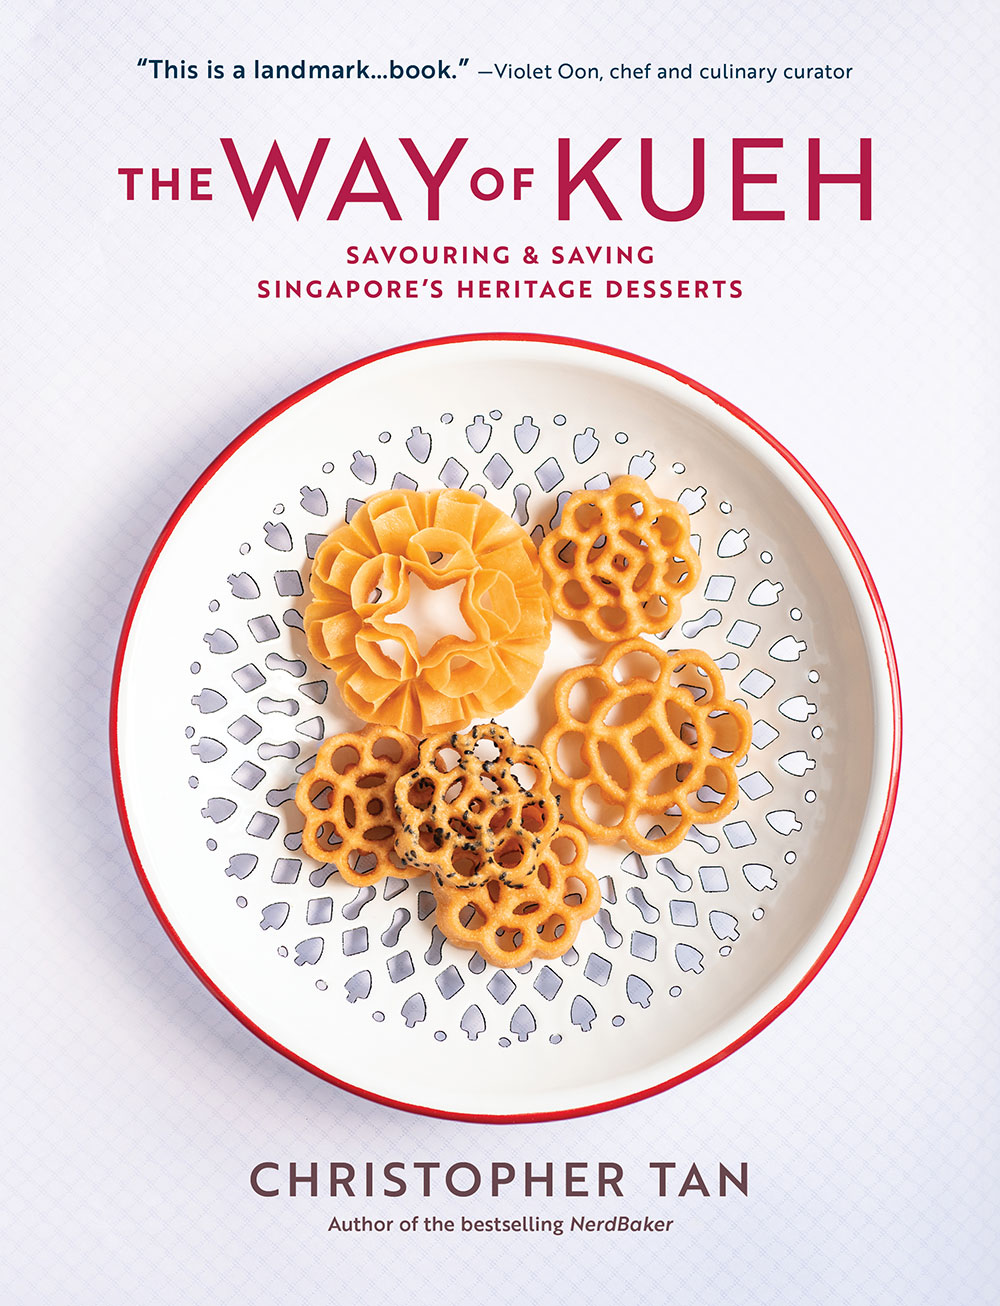 'The Way of Kueh' by Christopher Tan wants you to appreciate and make 'kueh' before the 'kueh' culture disappears.